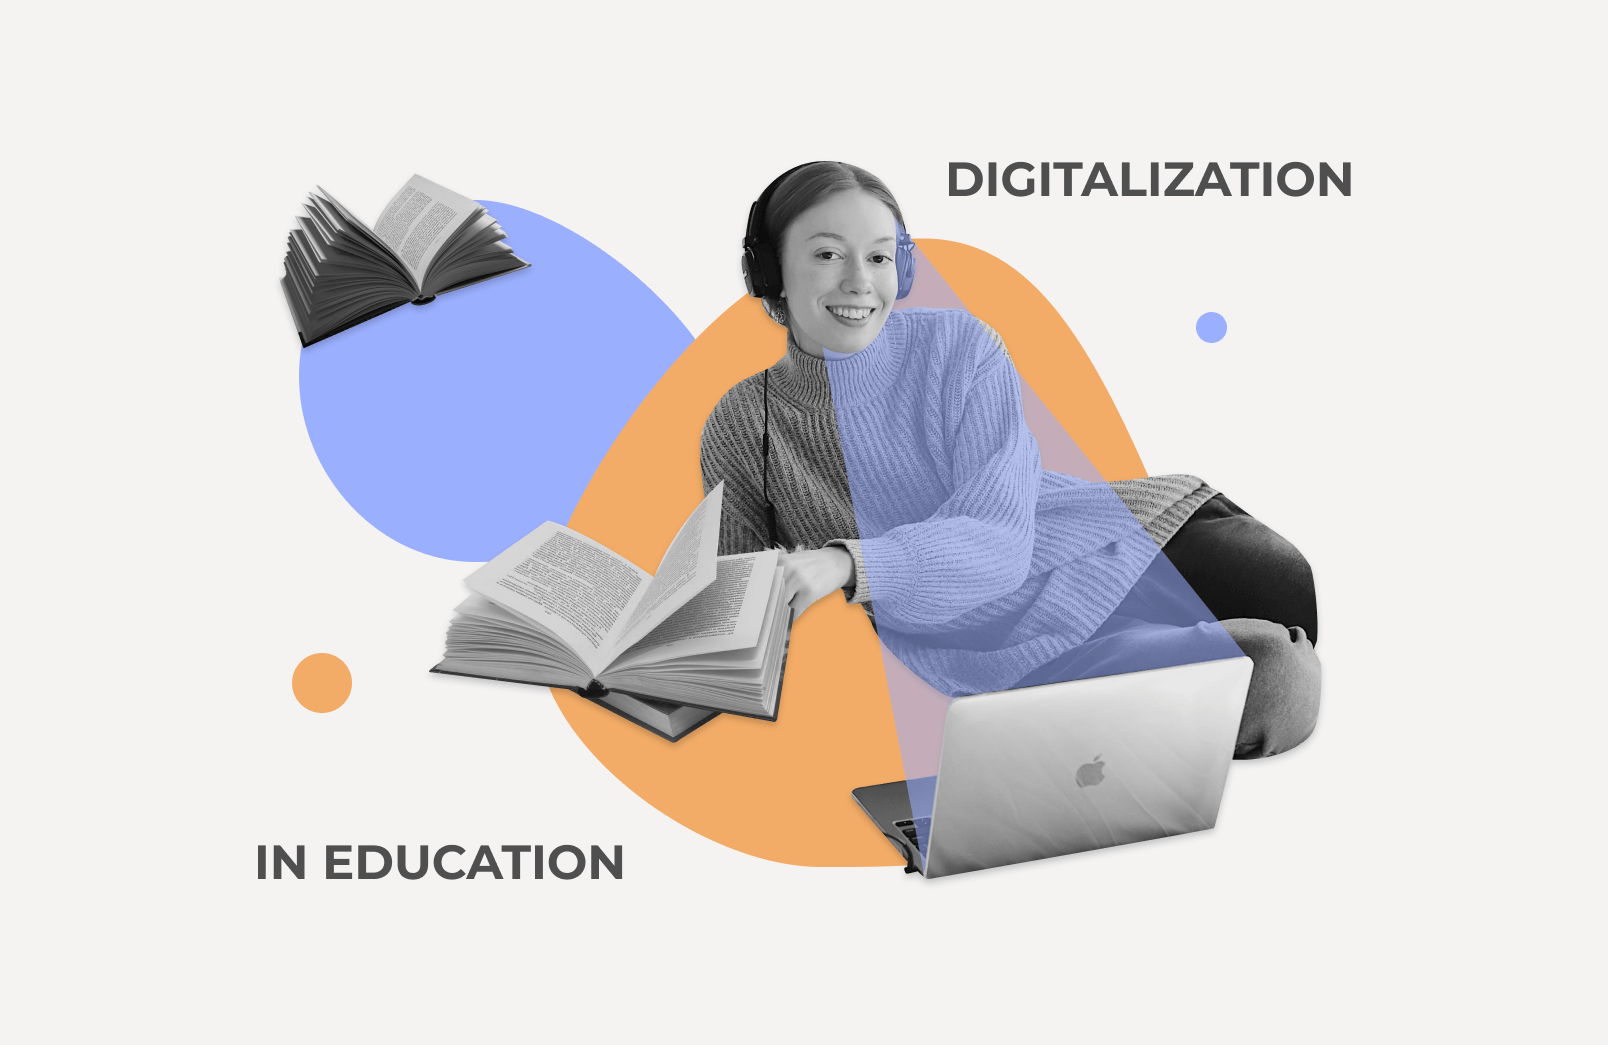 Digital Transformation in Education: Redefining the Experience of Everyone Involved